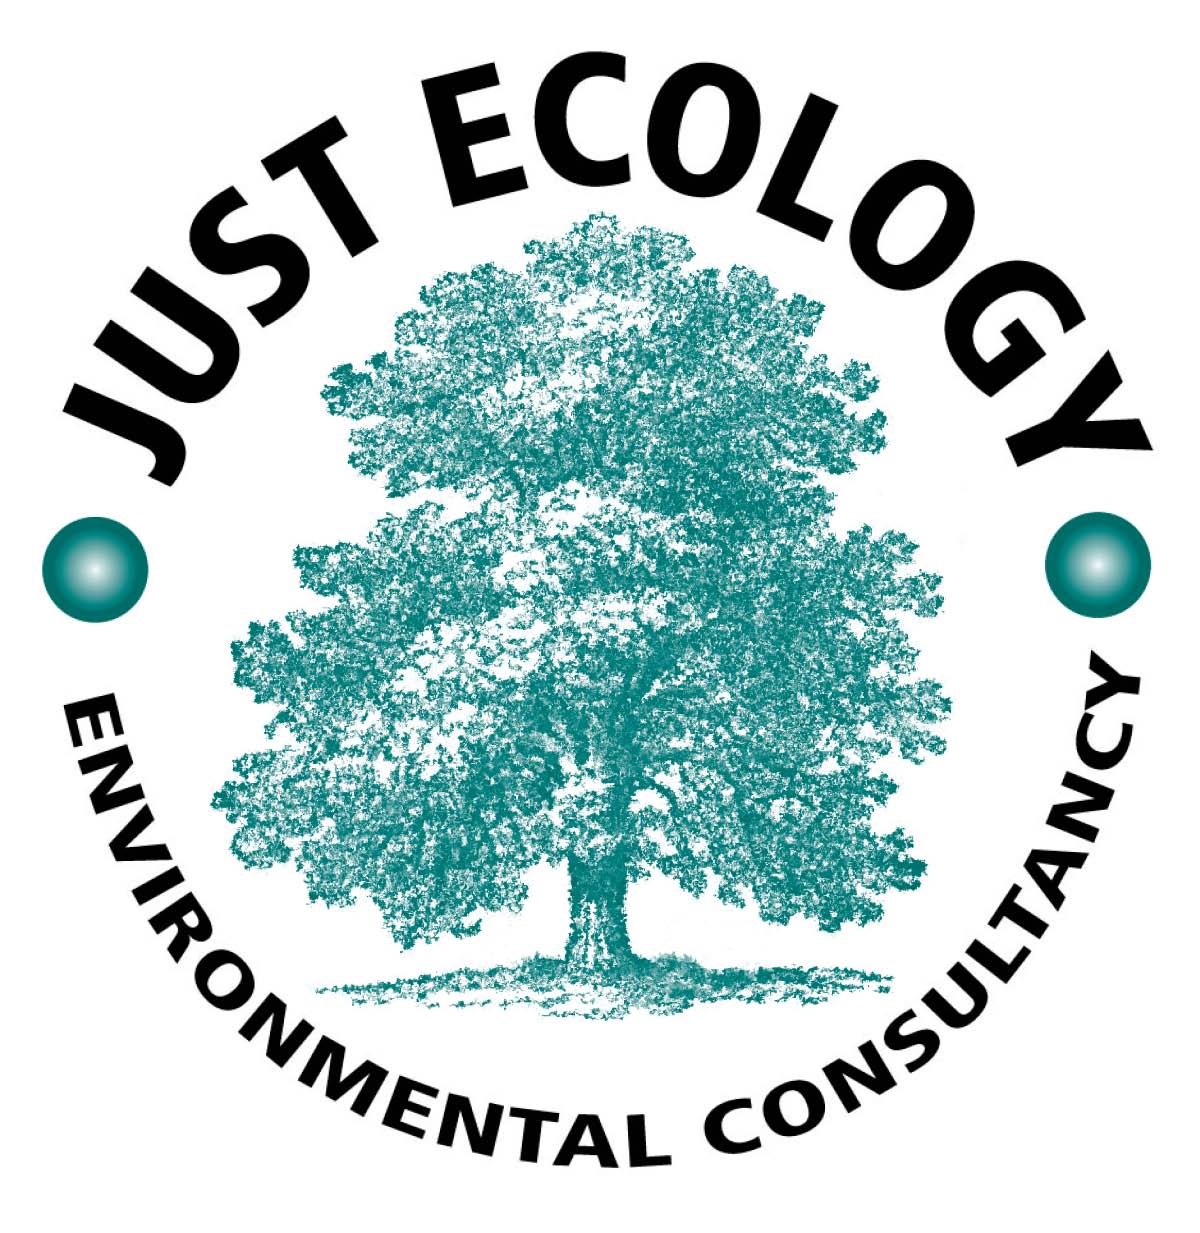 JUST ECOLOGY